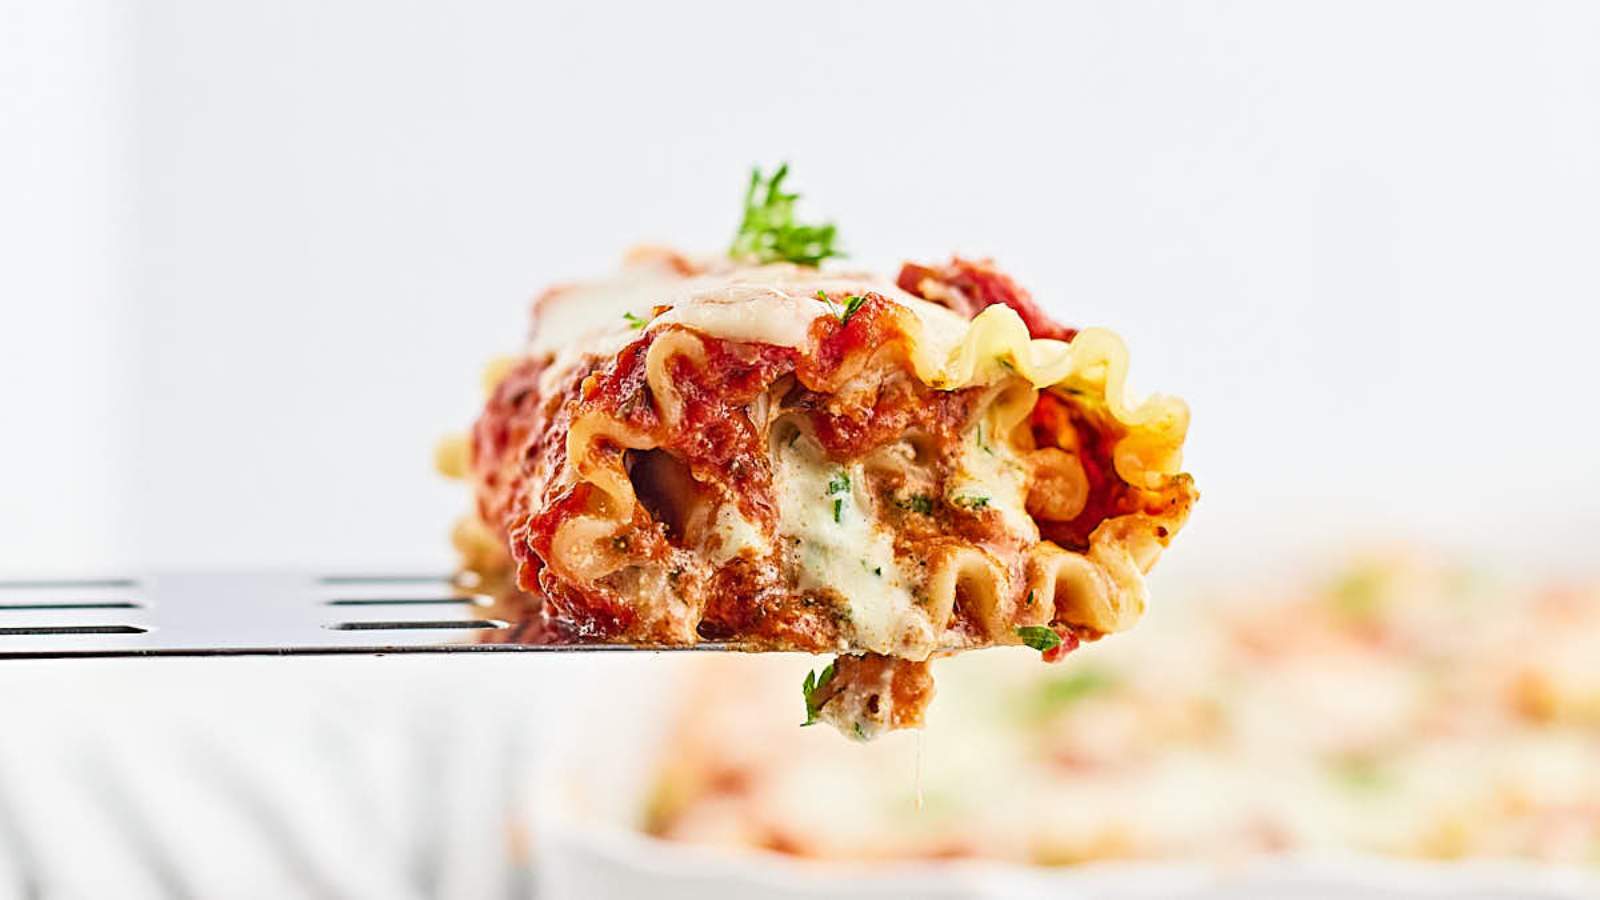 <p>Lasagna Roll-Ups are a fun, creative, and delicious twist on traditional lasagna. A lasagna noodle is rolled around a mouth-watering cheese and meat sauce filling.</p><p><strong>Get the Recipe: <a href="https://cheerfulcook.com/lasagna-roll-ups/" rel="noreferrer noopener">Lasagna Roll-Ups</a></strong></p>